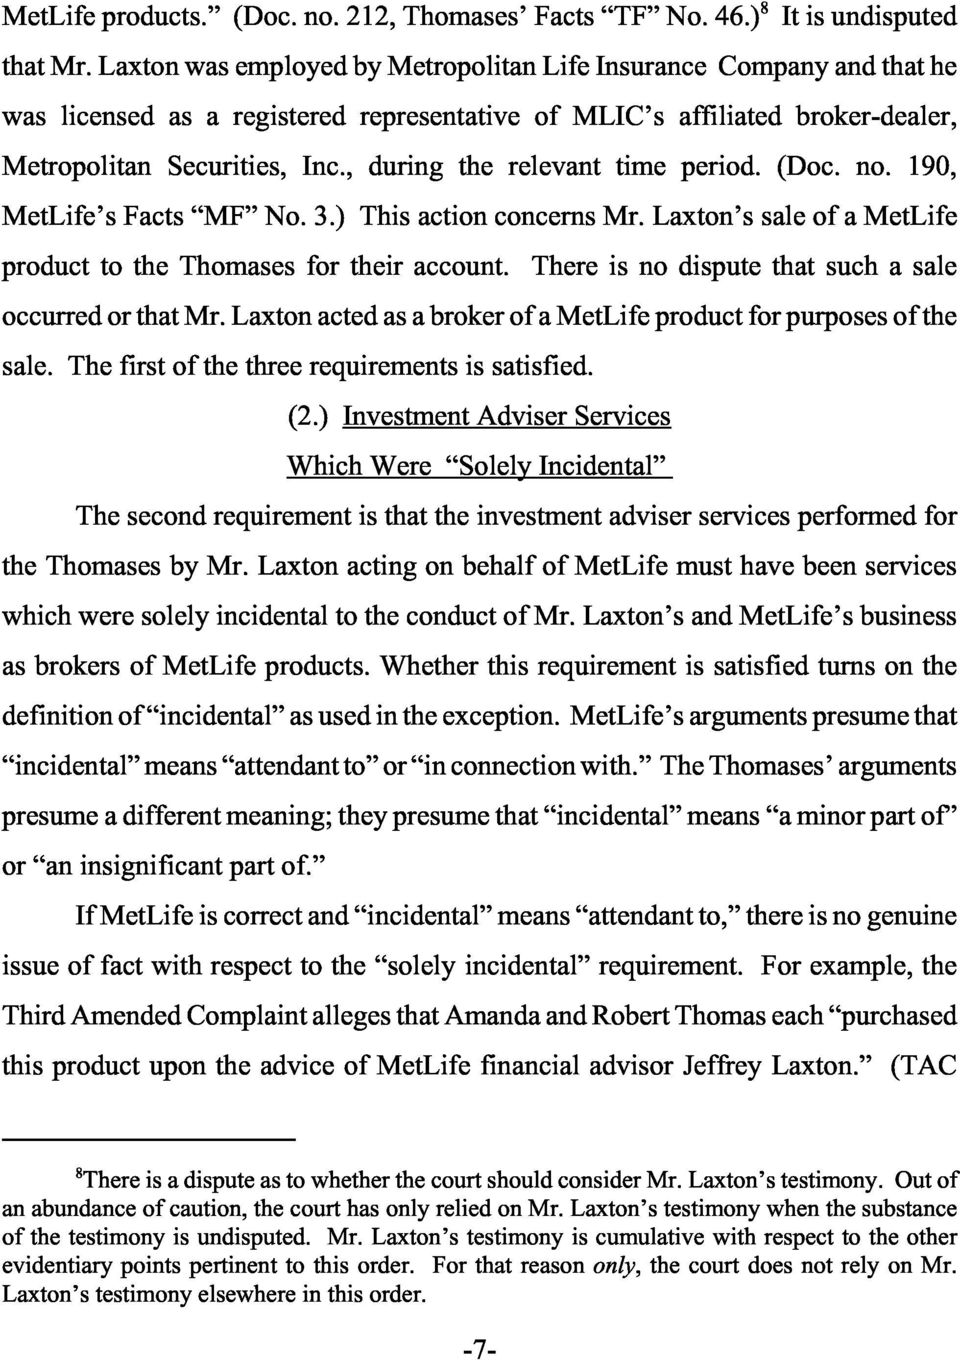 , during the relevant time period. (Doc. no. 190, MetLife s Facts MF No. 3.) This action concerns Mr. Laxton s sale of a MetLife product to the Thomases for their account.